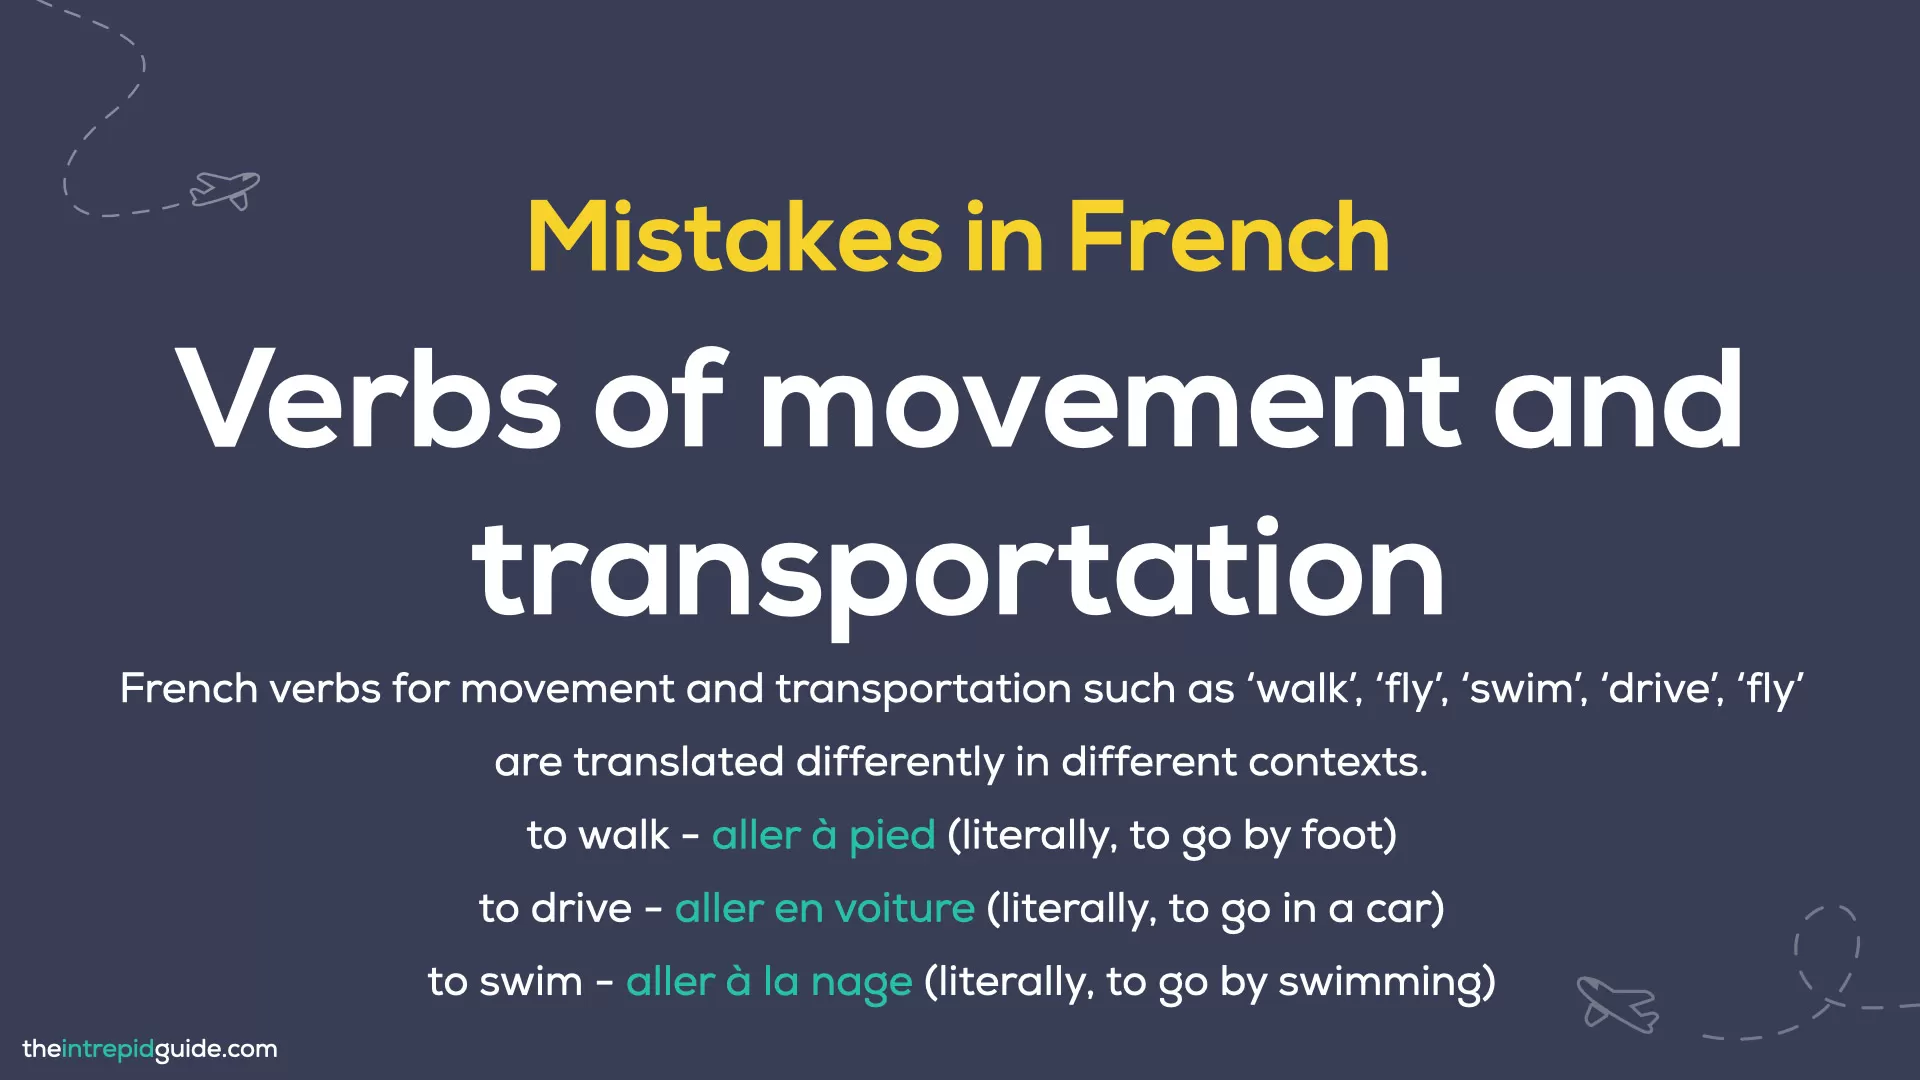 https://www.theintrepidguide.com/wp-content/uploads/2020/11/Mistakes-in-French-Verbs-of-movement-and-transportation.jpg.webp